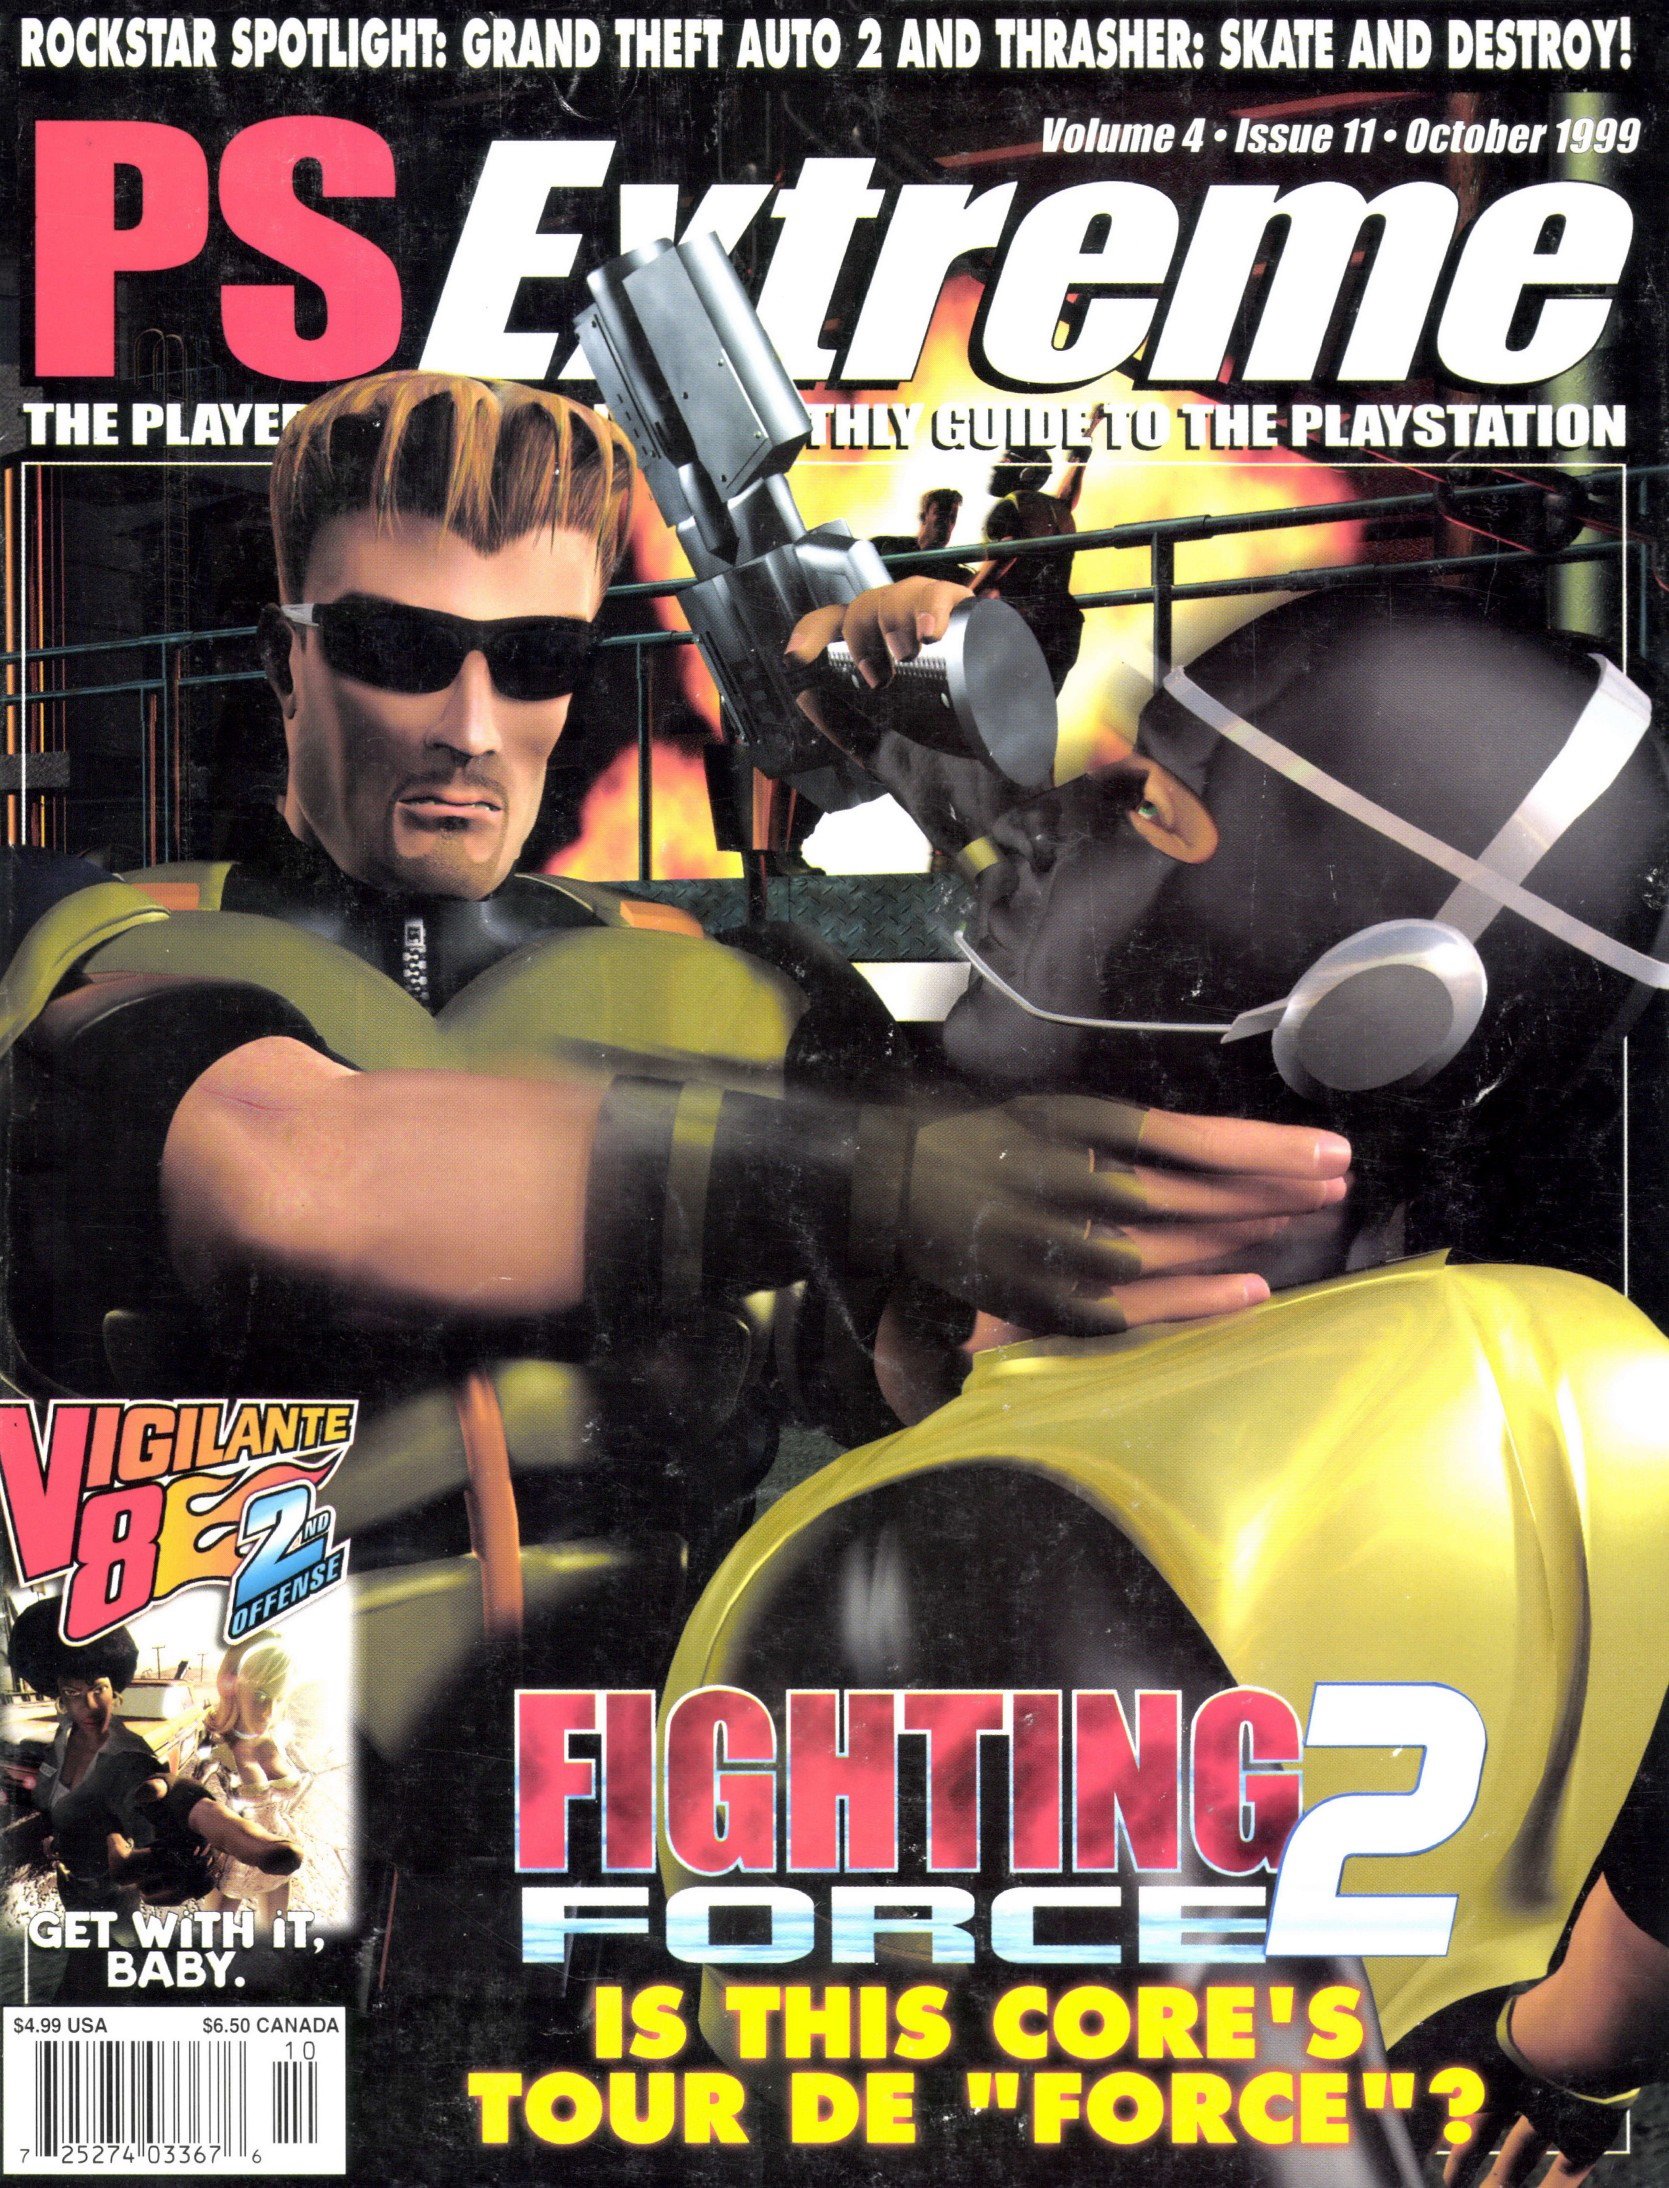 PSExtreme Issue 47 (October 1999)